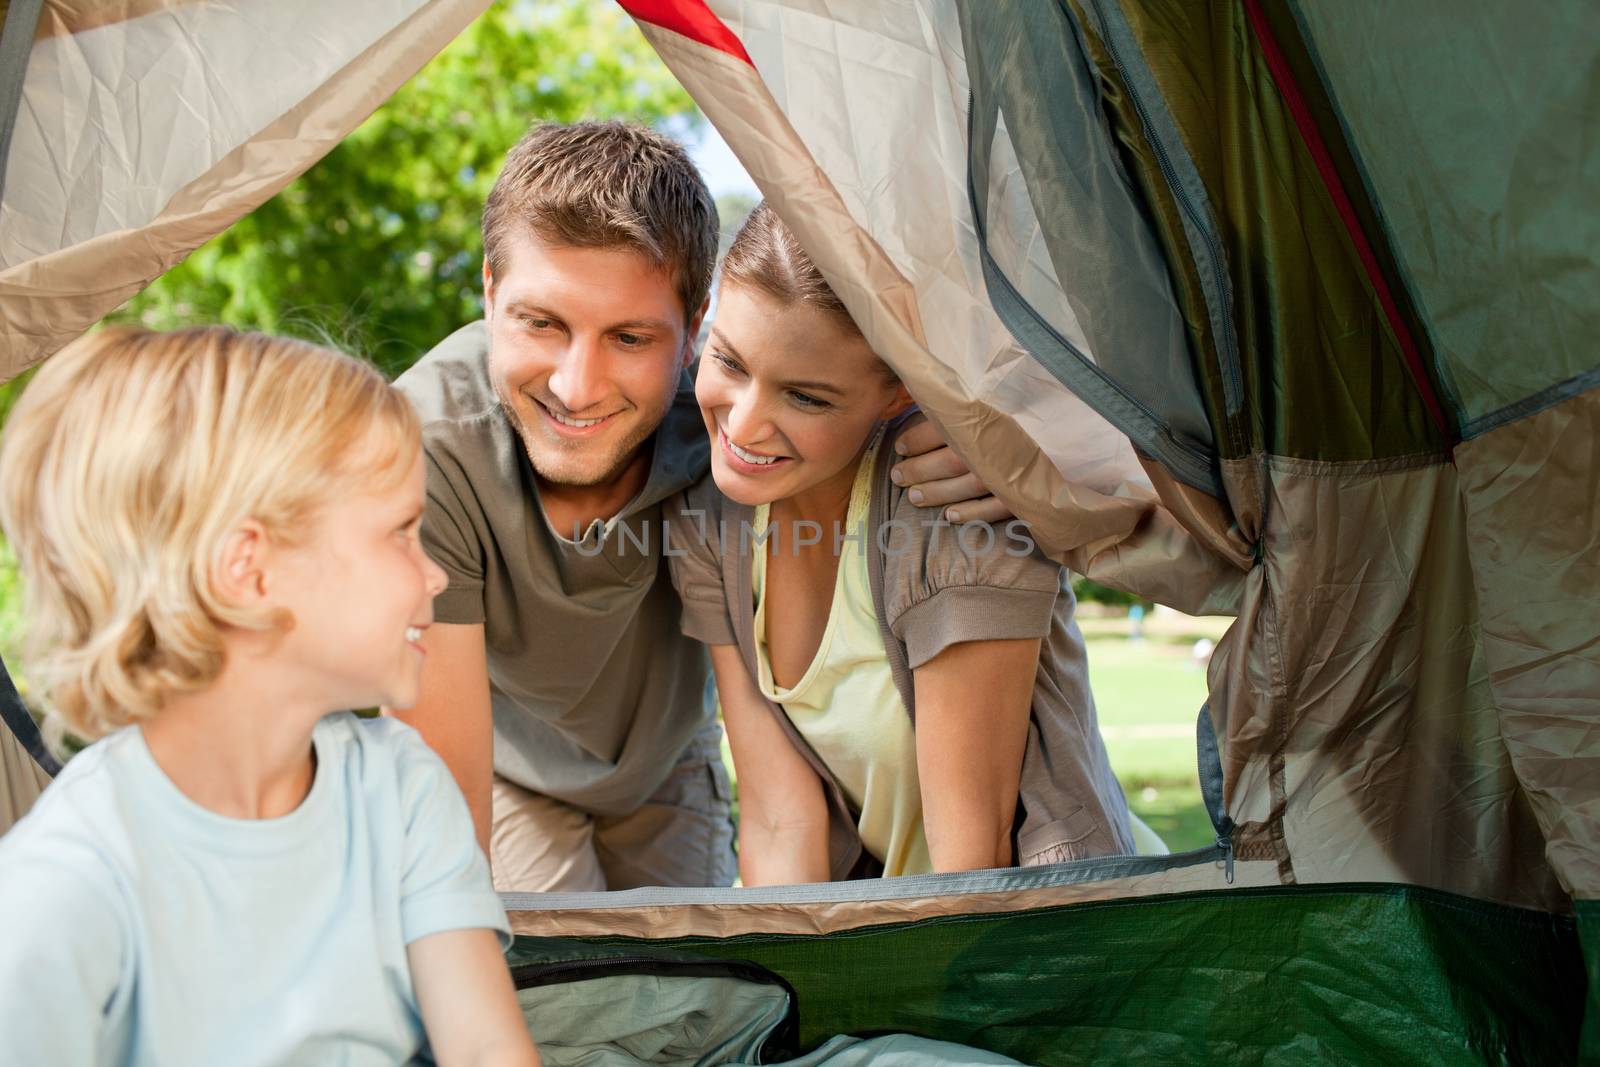 Family camping in the park during the summer